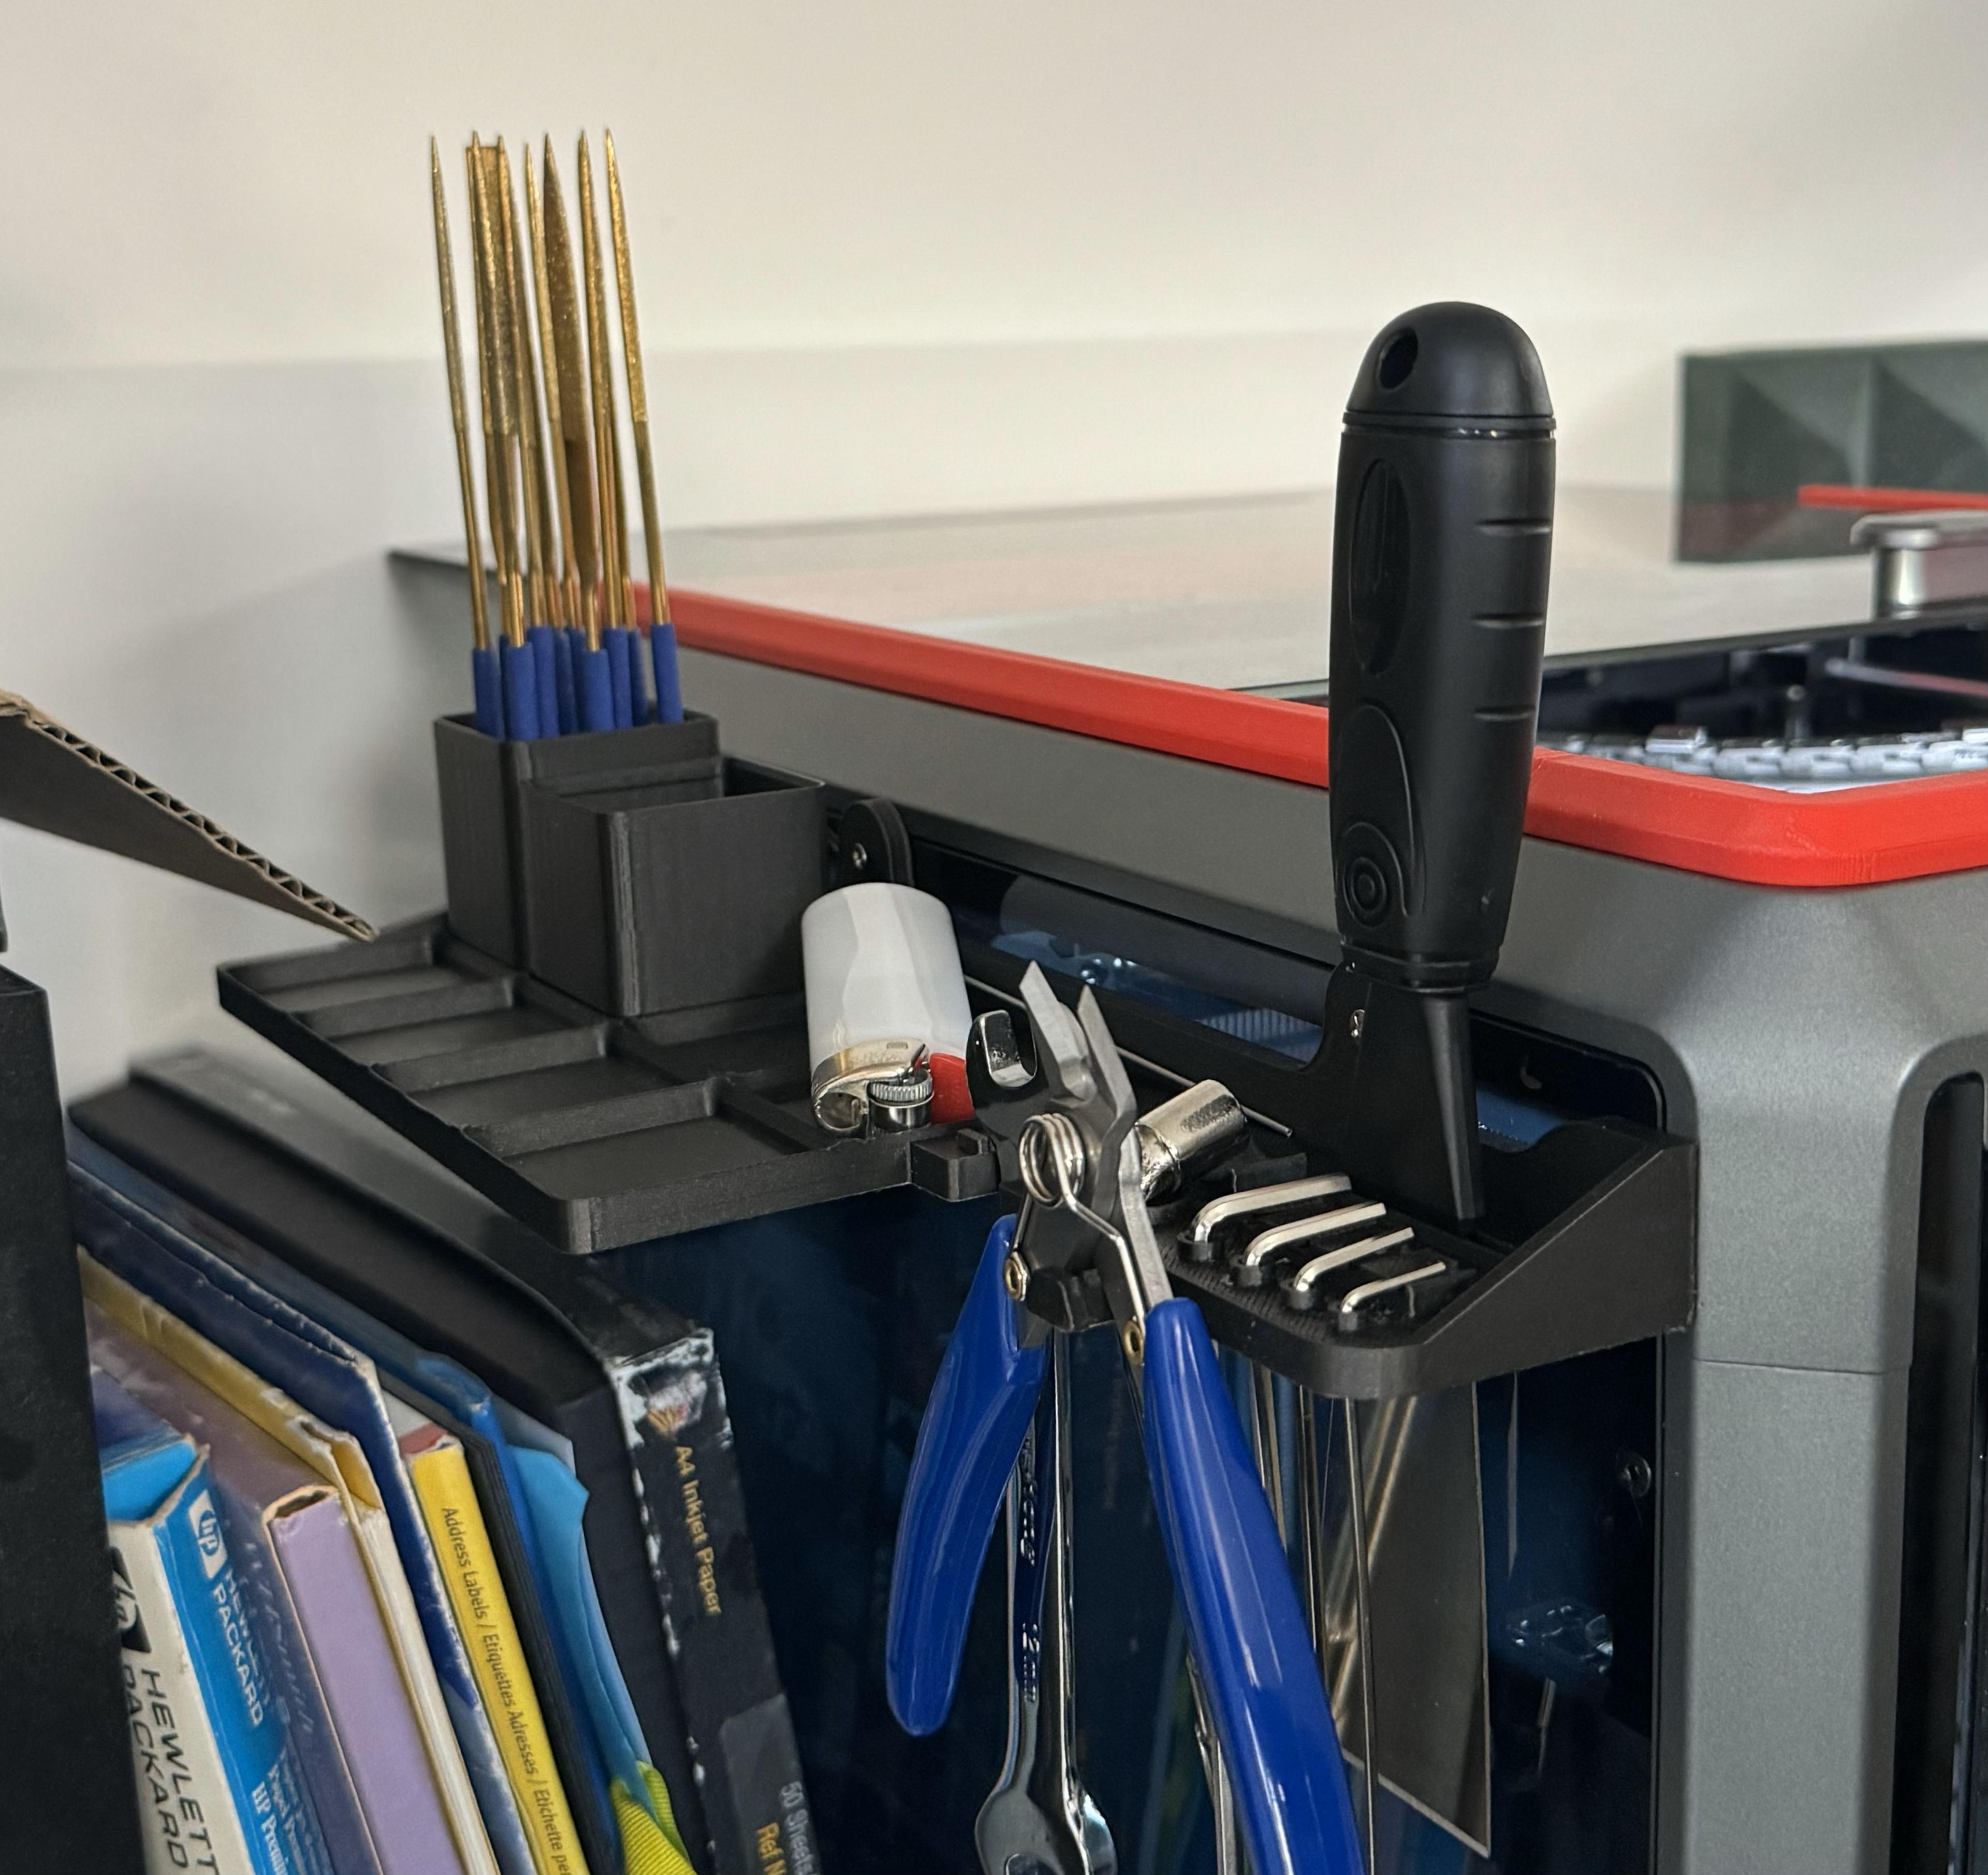 Creality K1 max tool holder Gridfinity 2x4 - Printed a mirror version for the left side. It's so nice having easy access to my tools! - 3d model